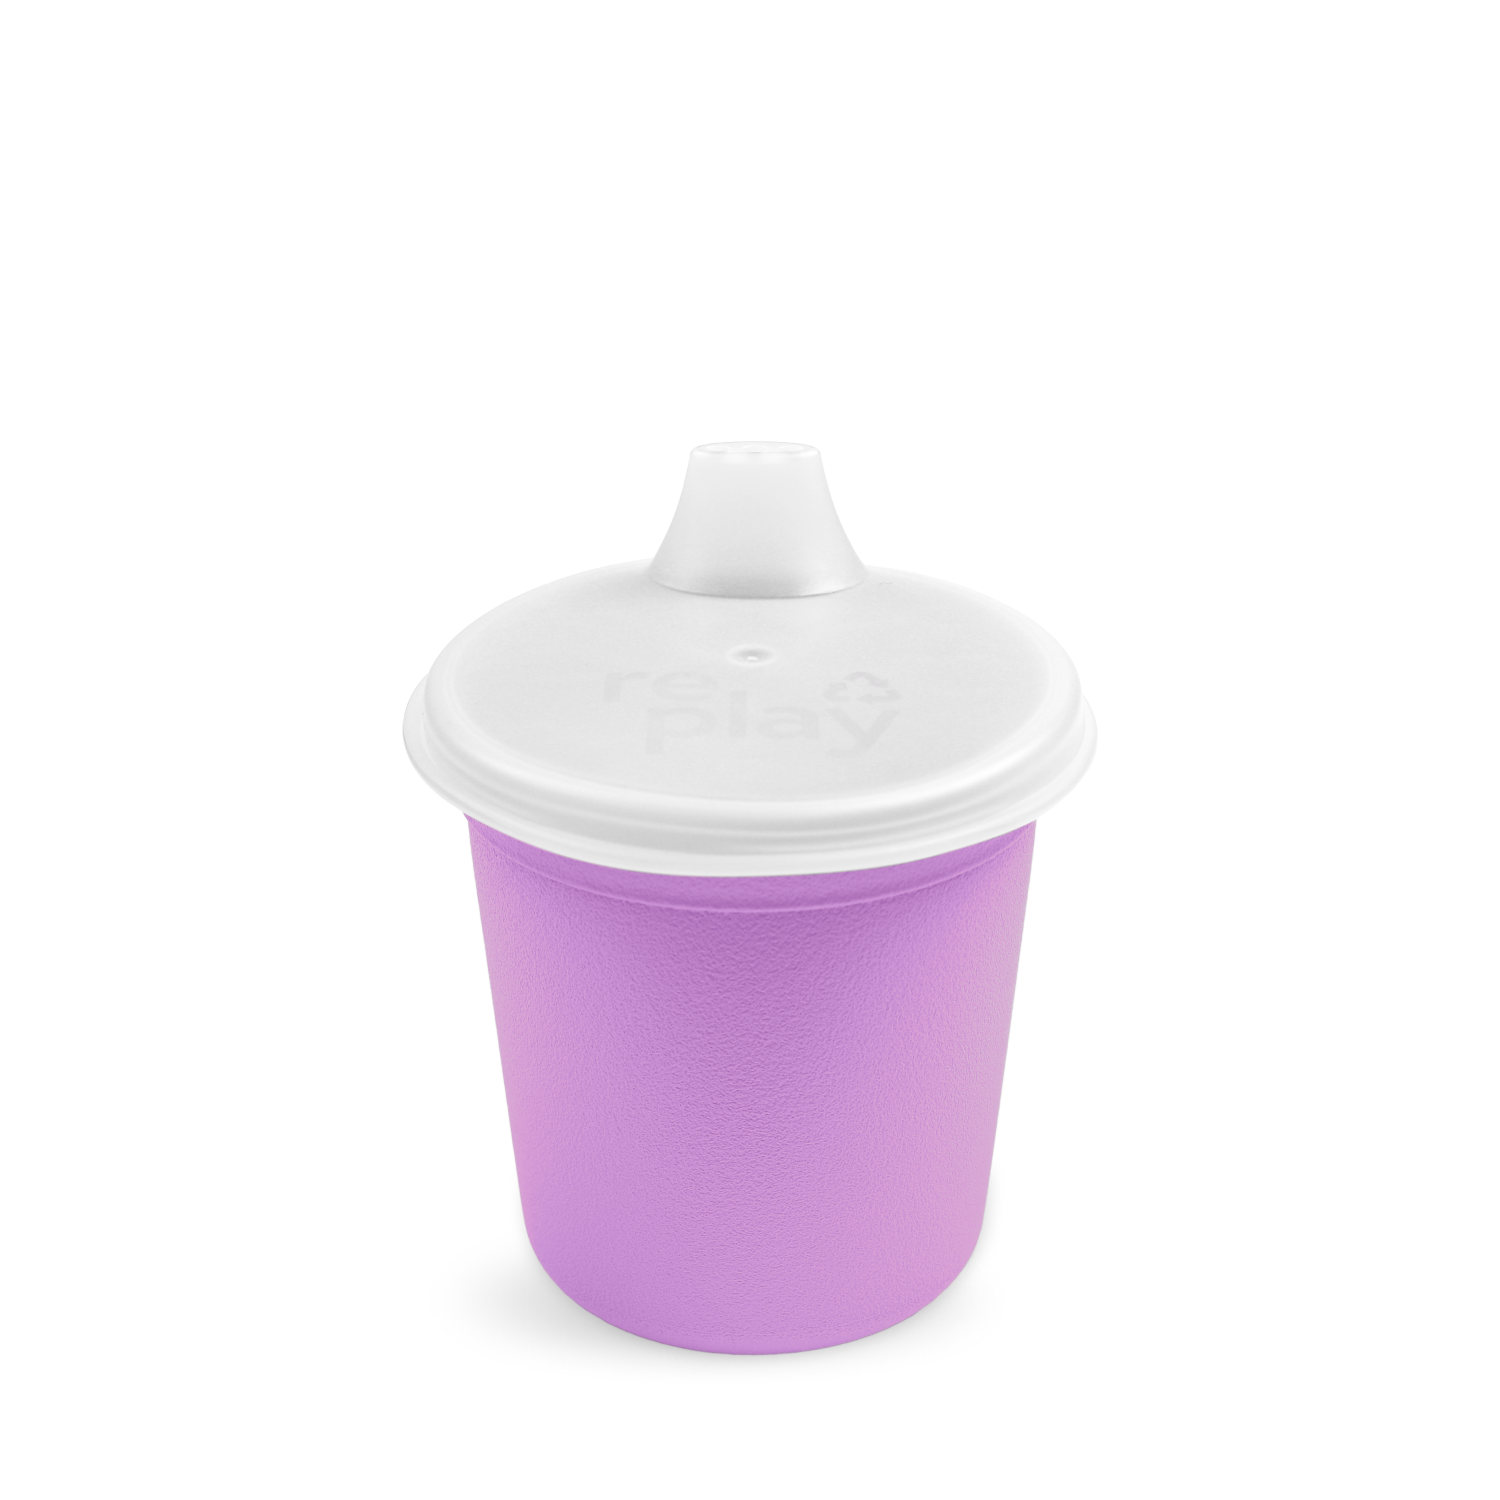 Re Play Made in USA 10 Oz. Sippy Cups for Toddlers, Pack of 6 - Reusable  Spill Proof Cups for Kids, …See more Re Play Made in USA 10 Oz. Sippy Cups